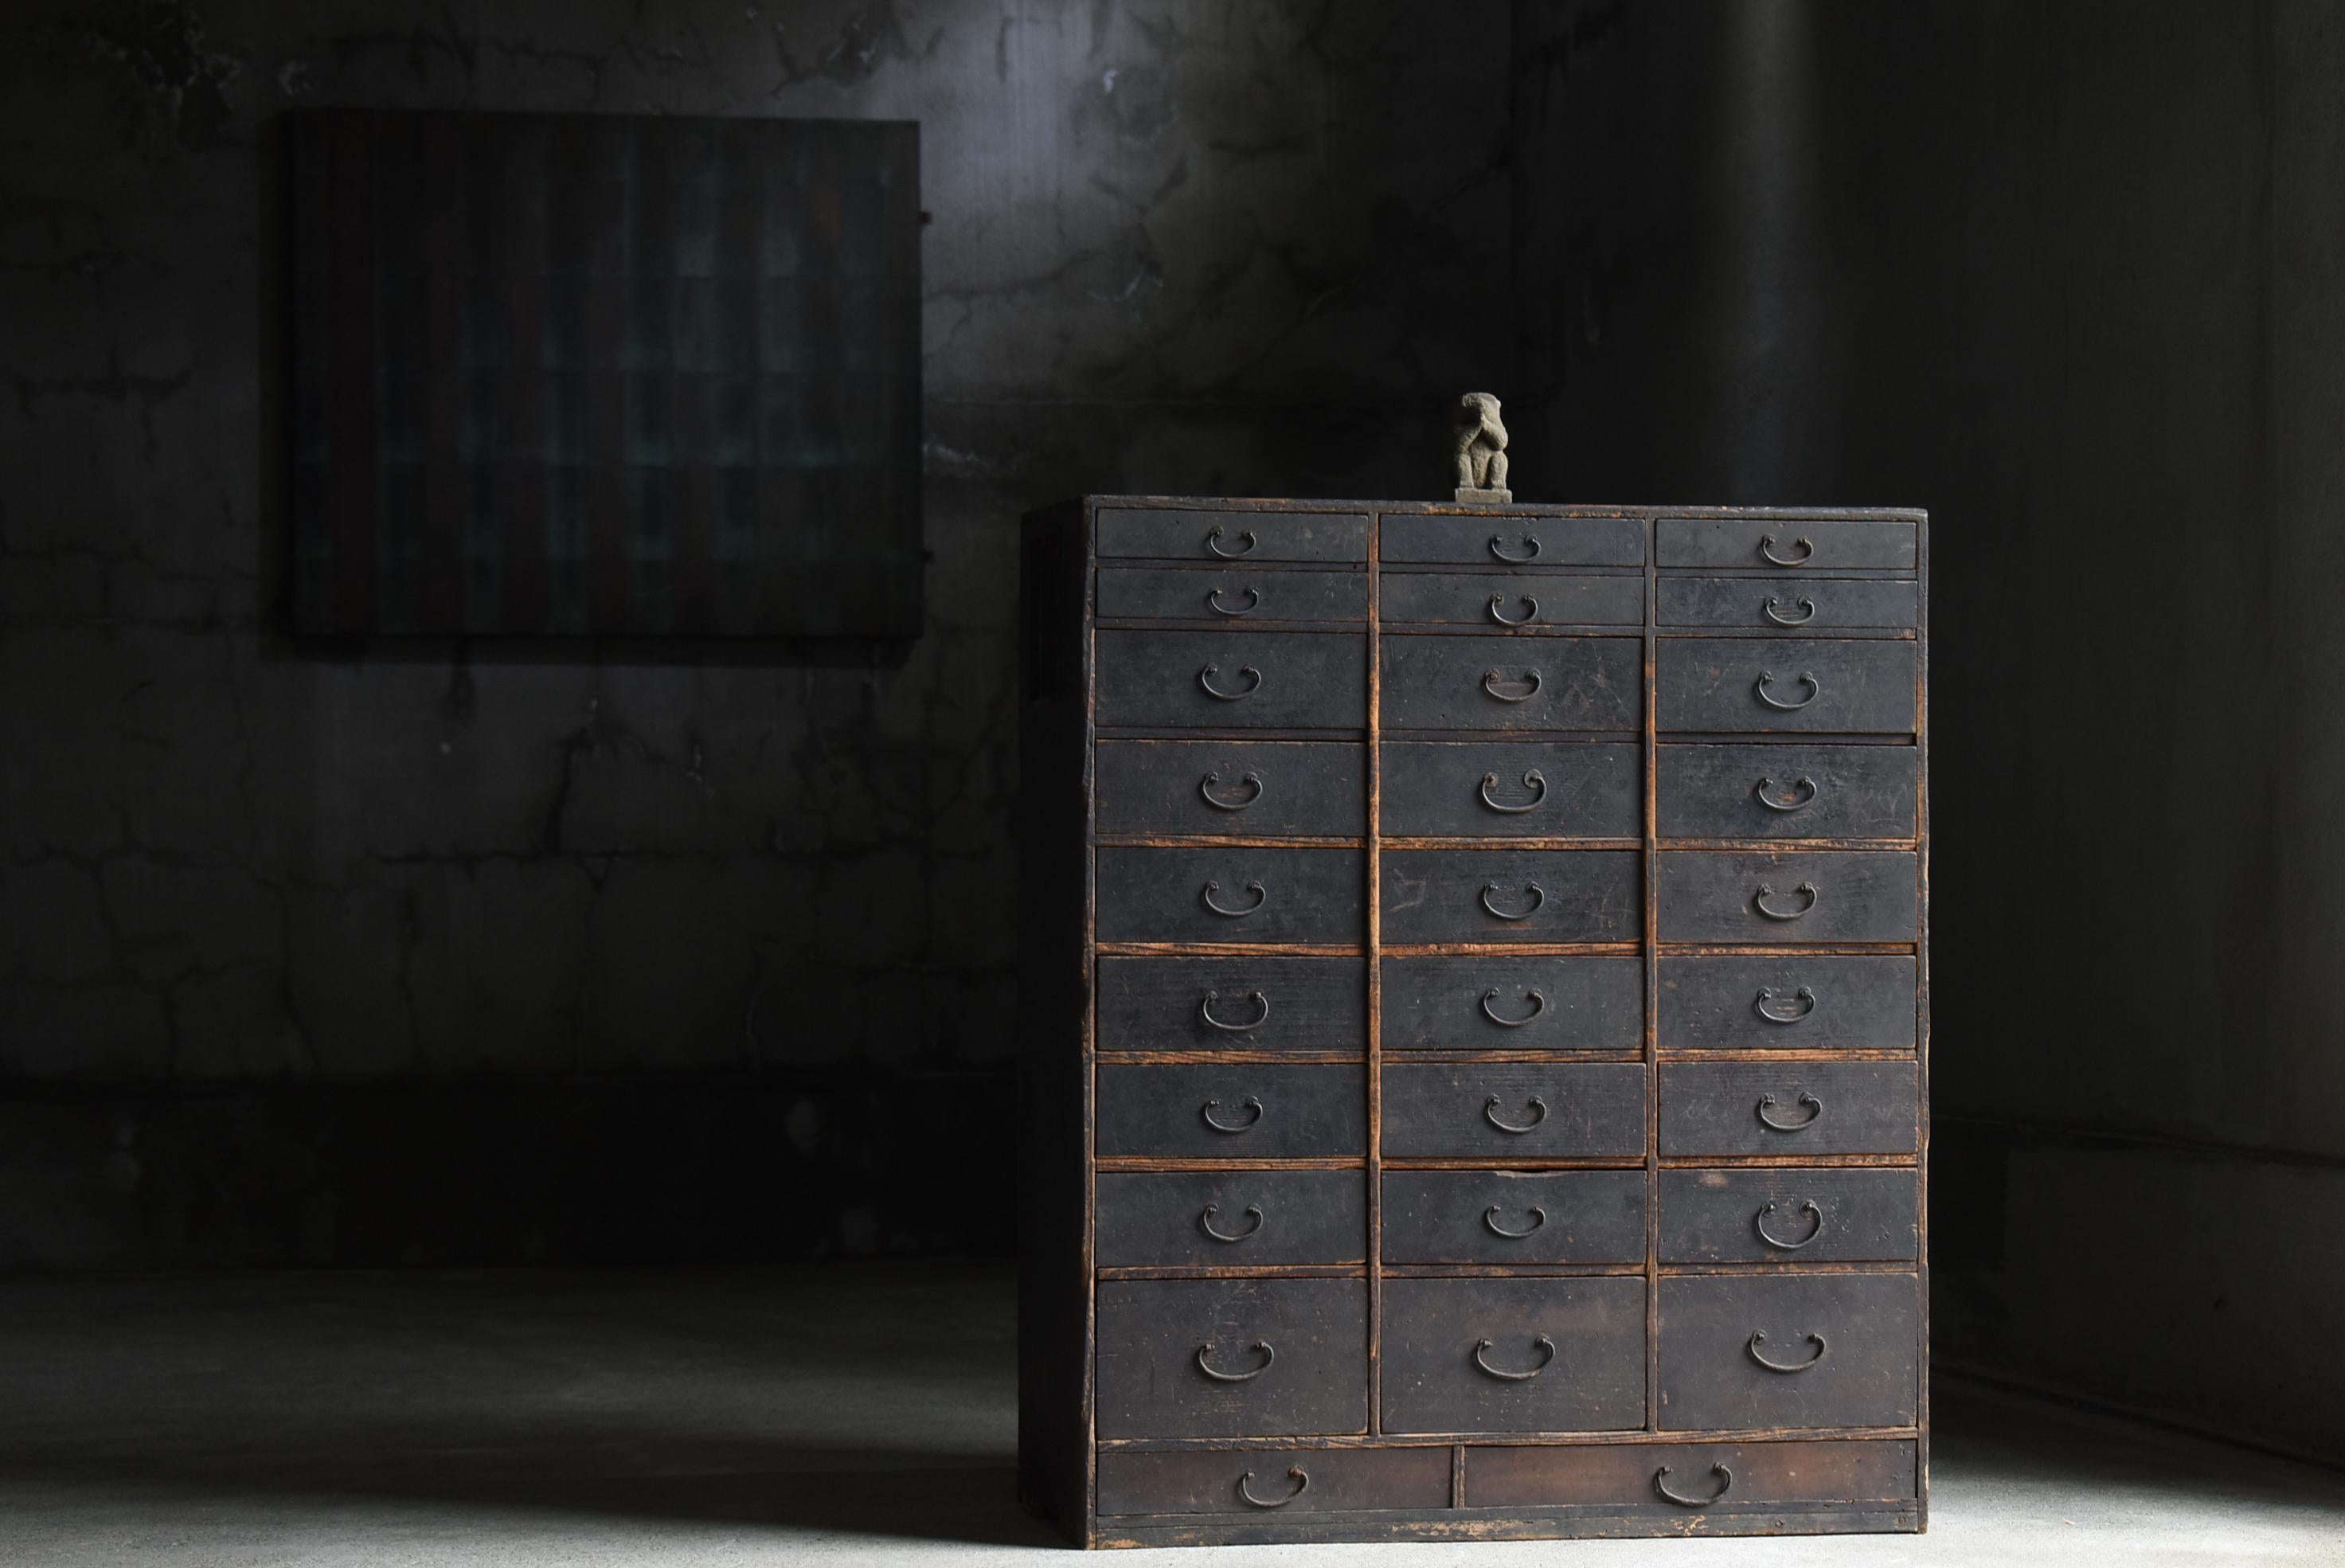 Very old Japanese drawer storage.
The furniture dates from the Meiji period (1860s-1900s).
It is made of cedar wood.
The metal fittings on the handles are made of iron.

The design is uniquely Japanese, rustic and lean.
It is the ultimate in